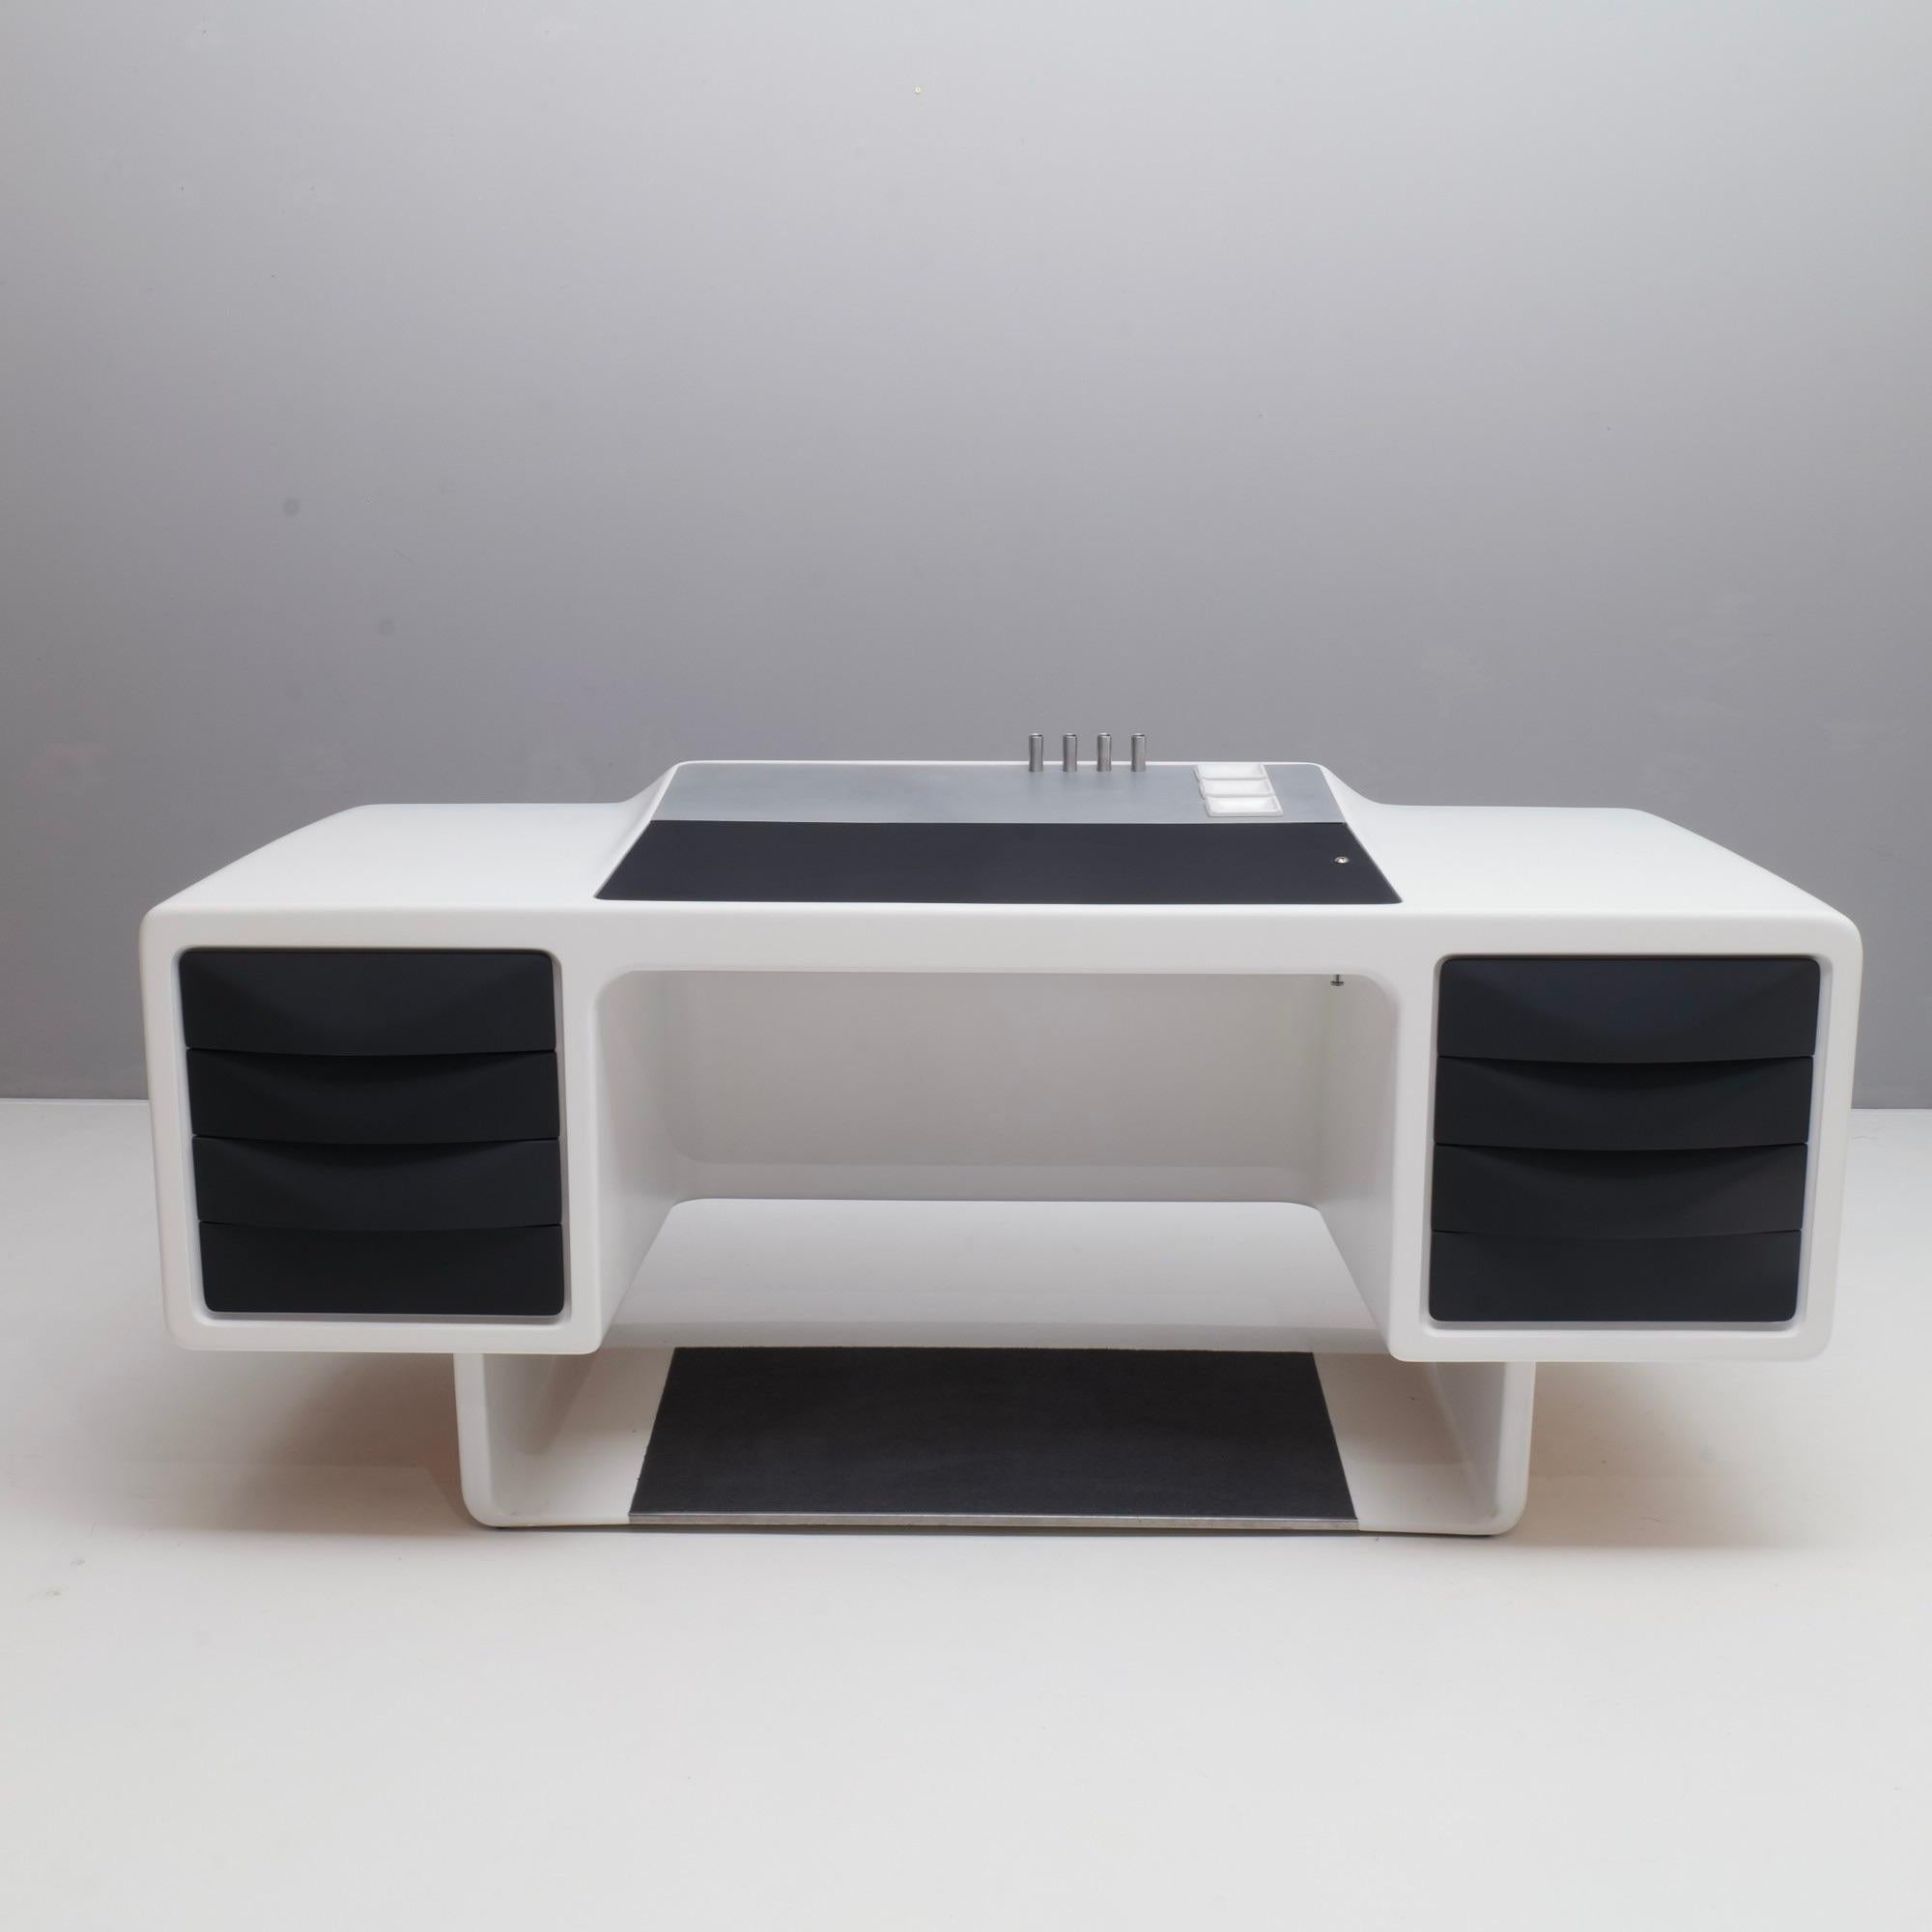 Igl Jet Top directors desk made out of  molded Baydur (Fiberglas)

Strong shapes and practical inlays as well as the hidden storage space combines design & function.

The material Baydur developed specifically for the table by Bayer AG in the 1970s.